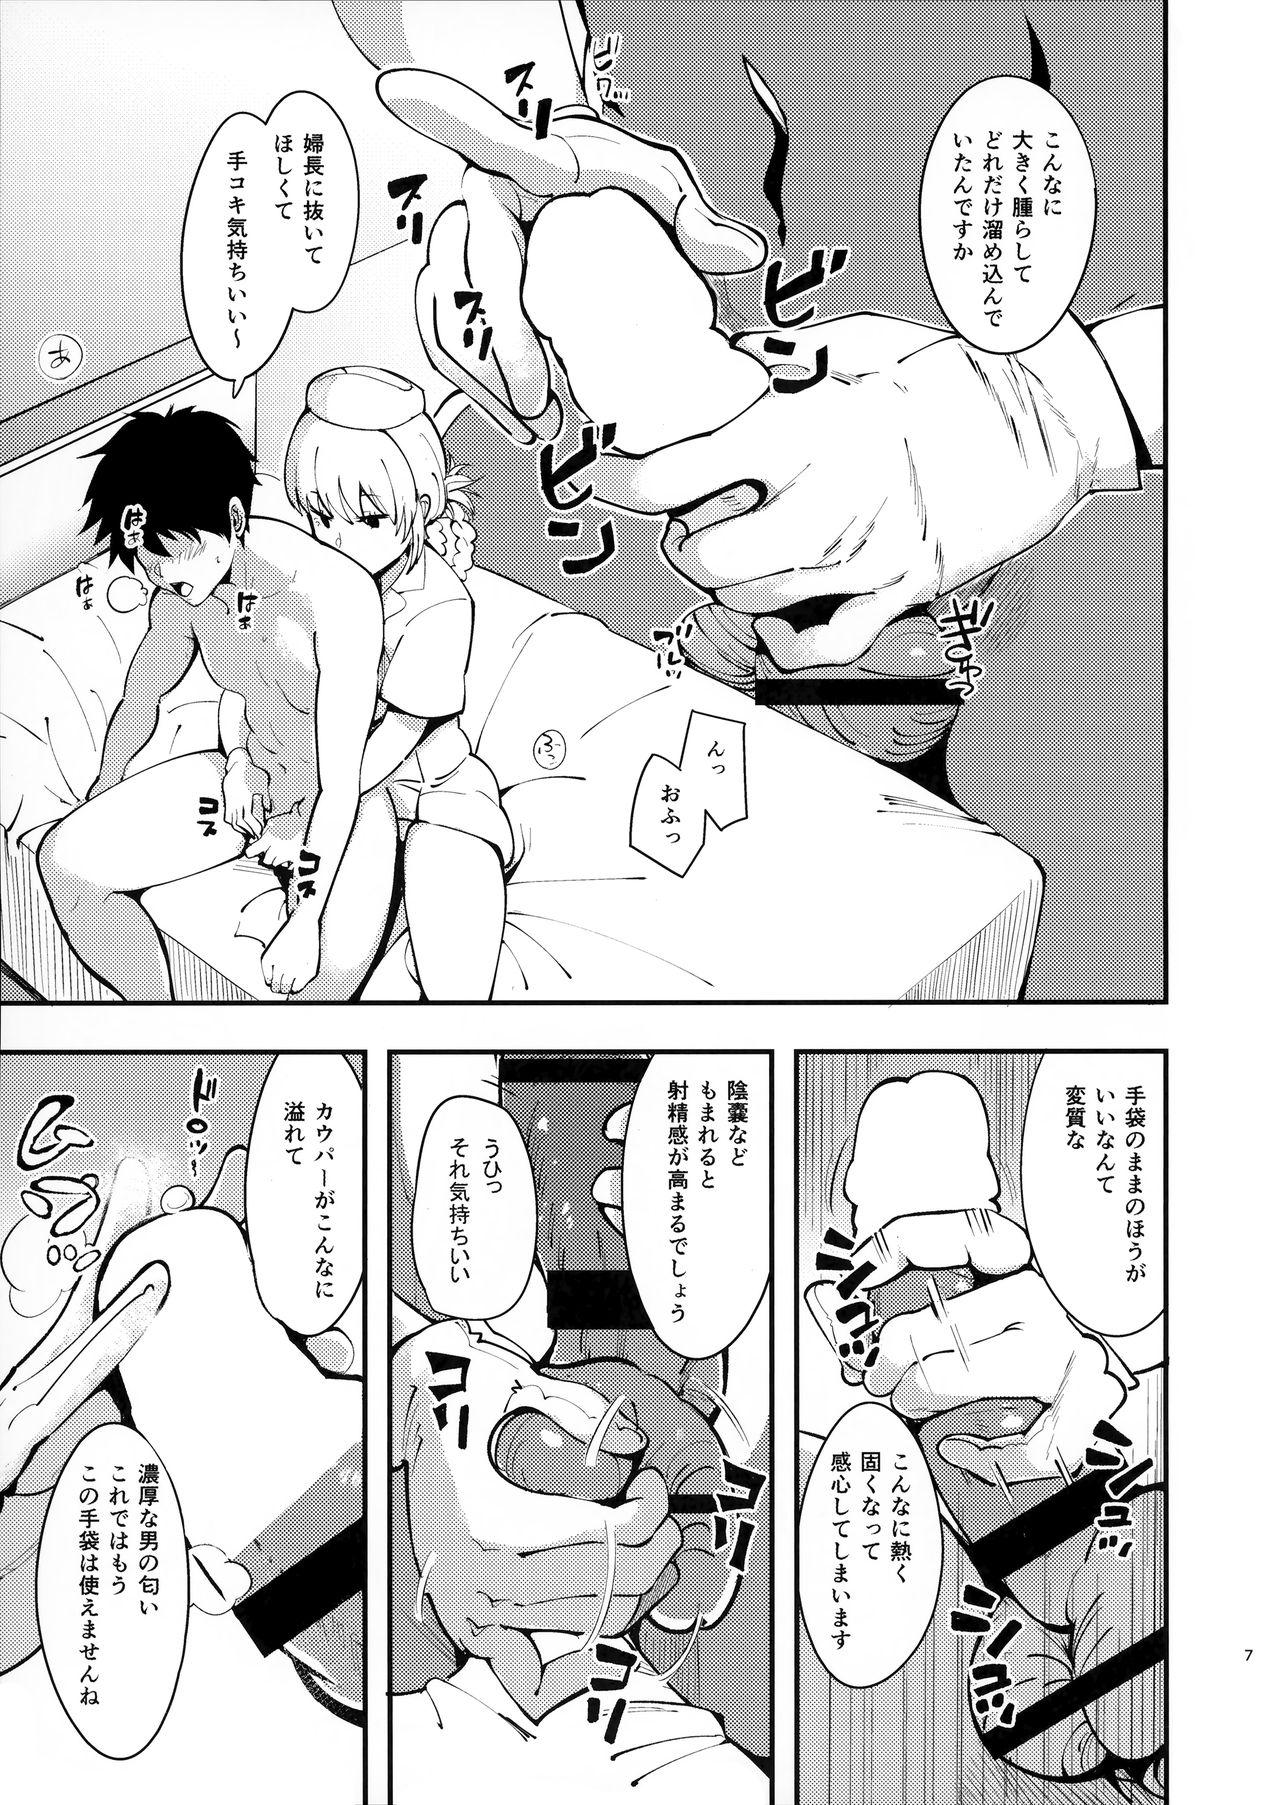 Chile Dreamin' Nightingale - Fate grand order Gay Doctor - Page 6